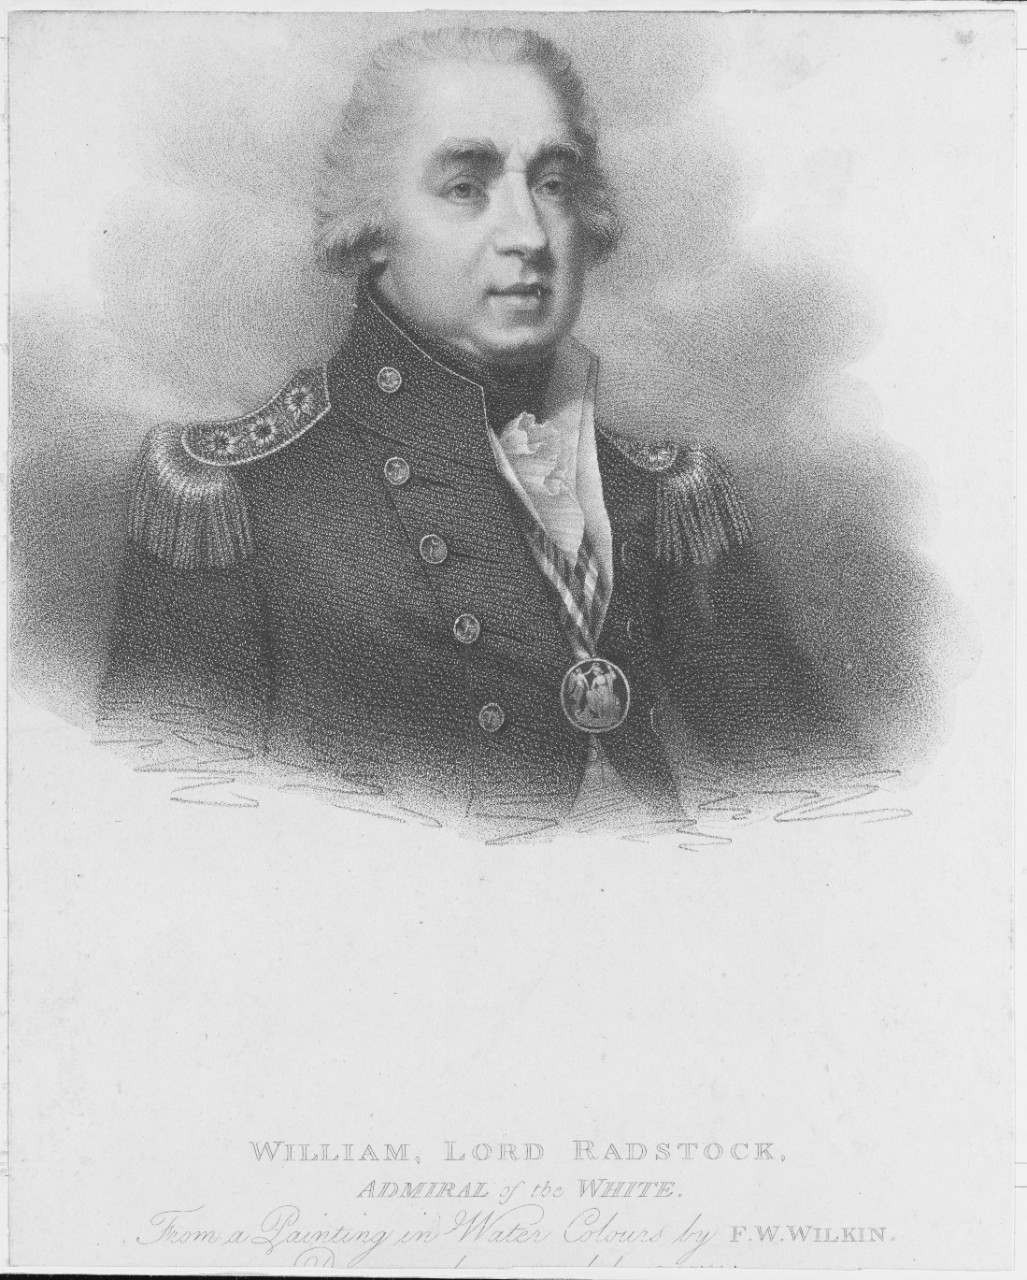 Lord Radstock William, Admiral of the White